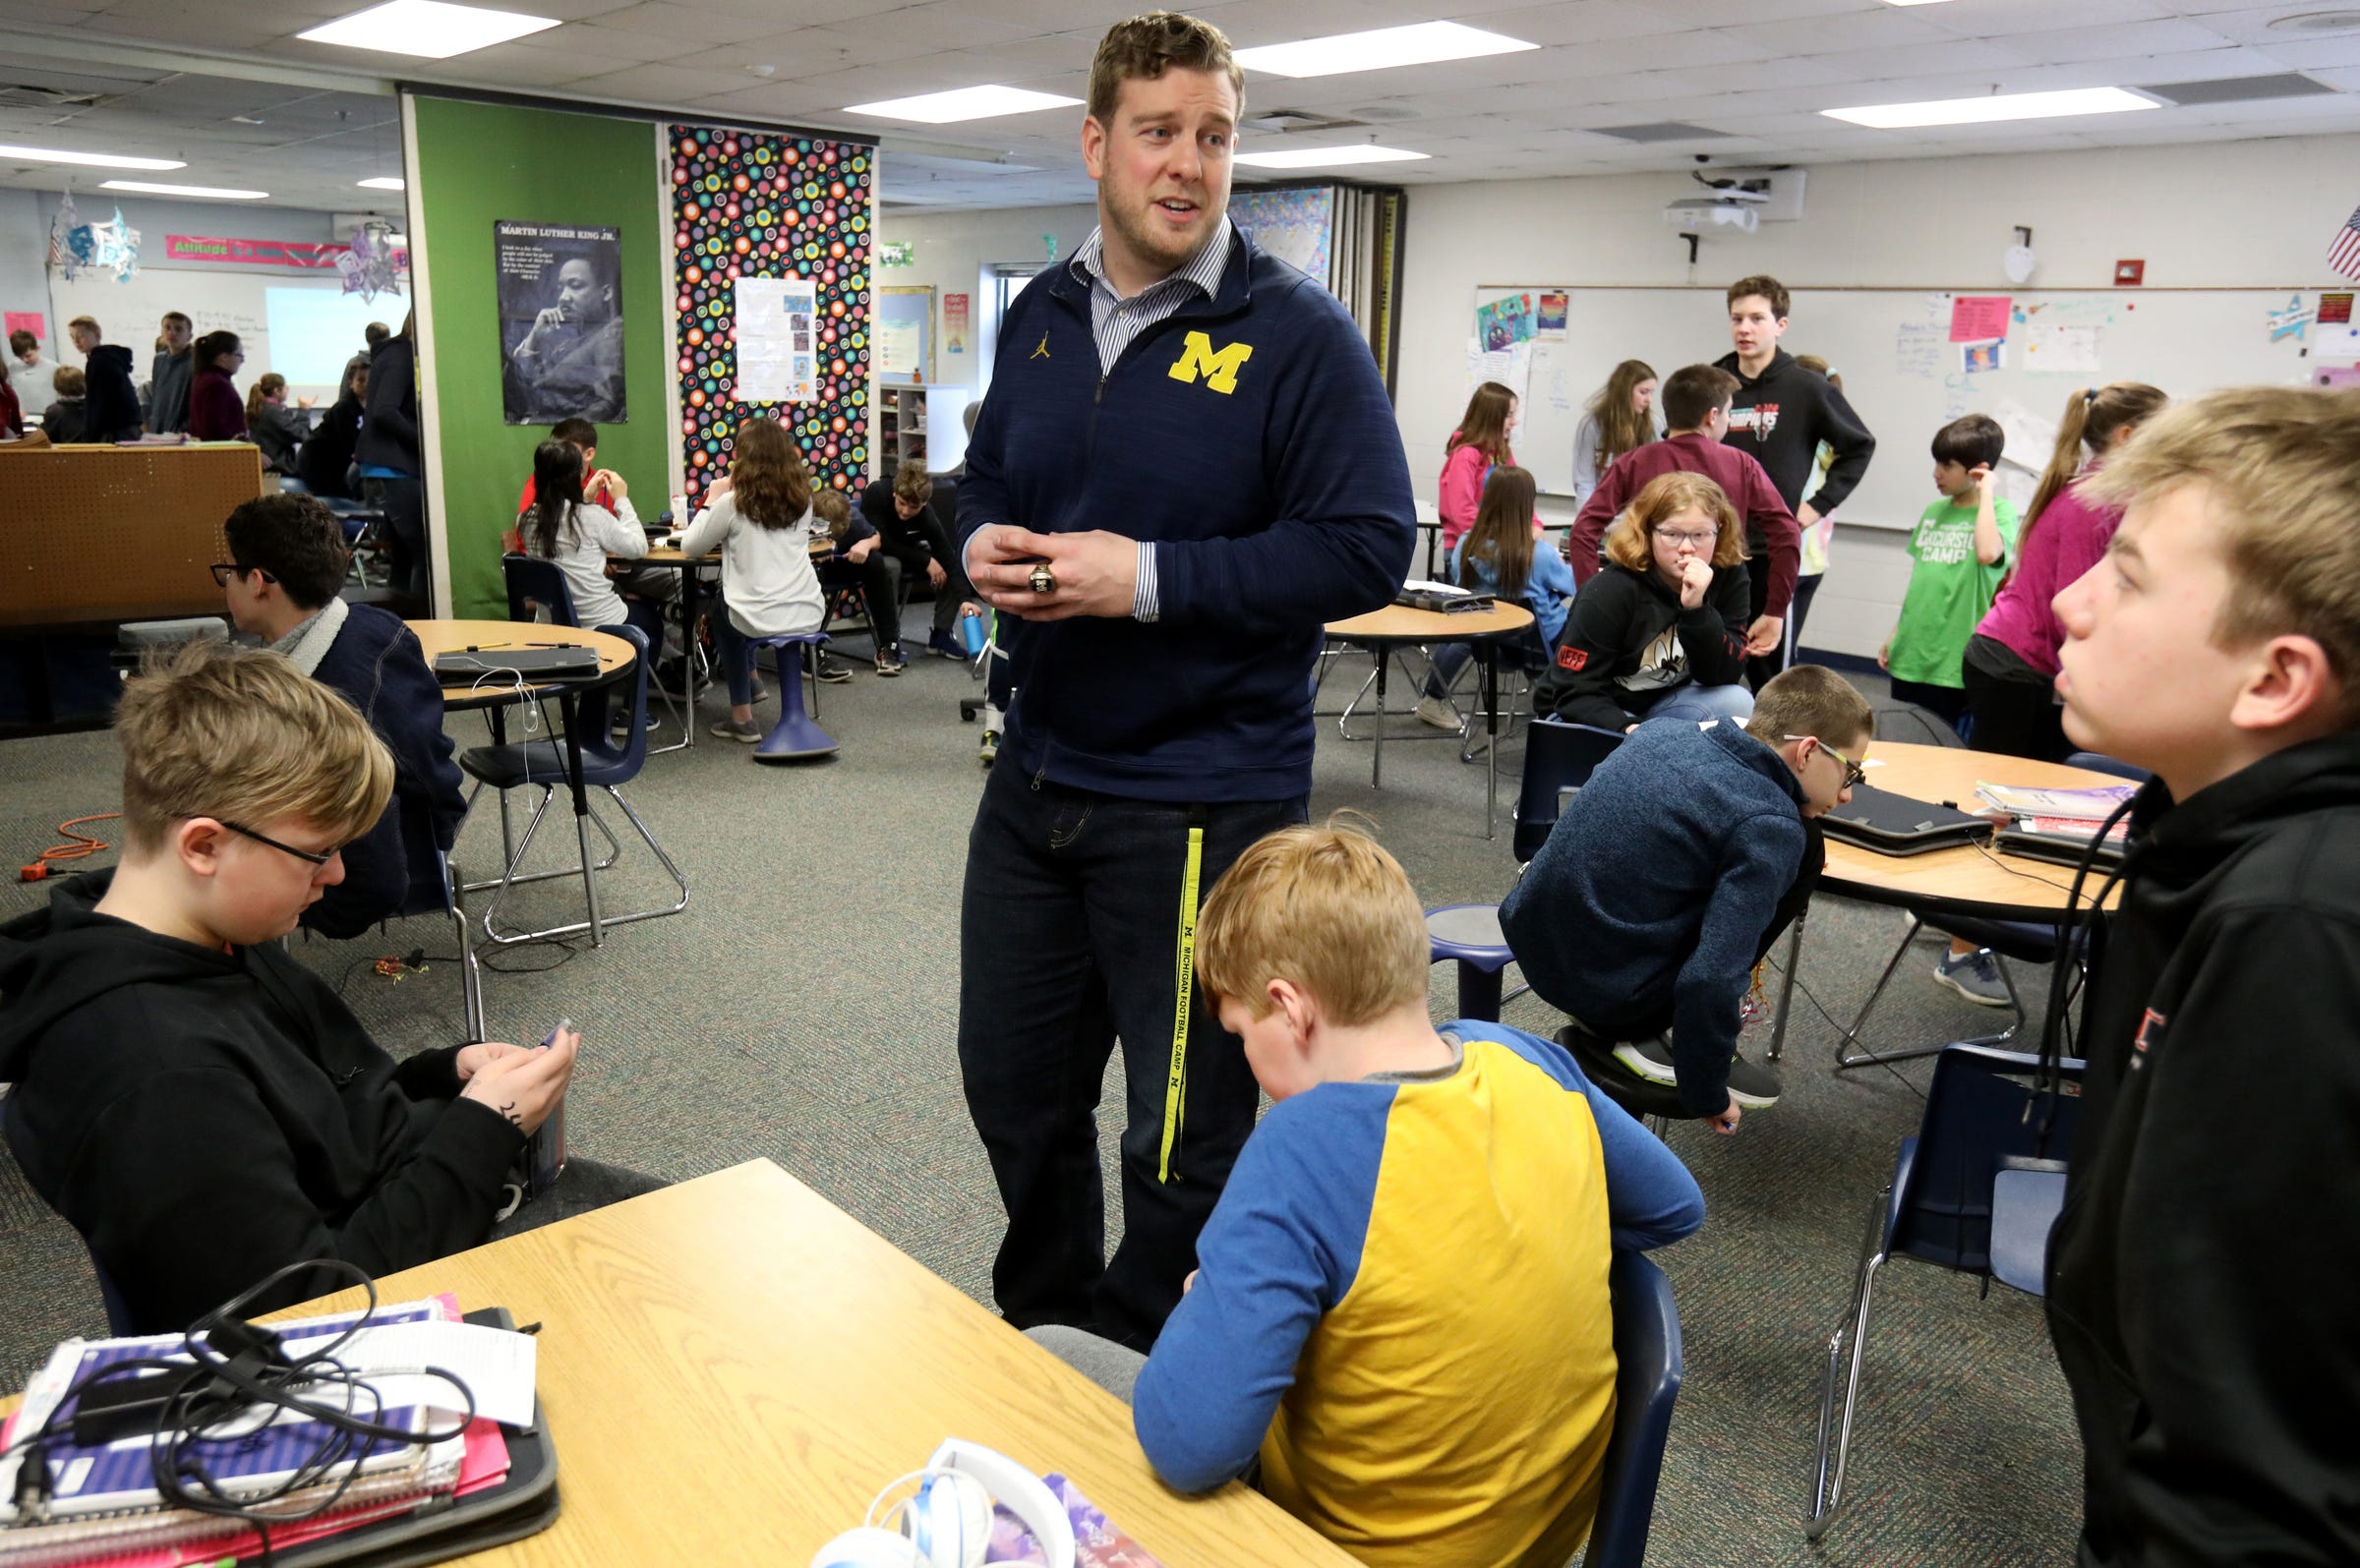 After his presentation former Michigan football player Will Heininger talks with seventh grade students at Mill Creek Middle School in Dexter, Michigan on Thursday, January 30, 2020.
Heininger suffered from depression and thoughts of suicide during his playing career at Michigan. With help he overcame that and now he works and talks with students to teach them how to talk about and deal with these kind of issues at an early age.